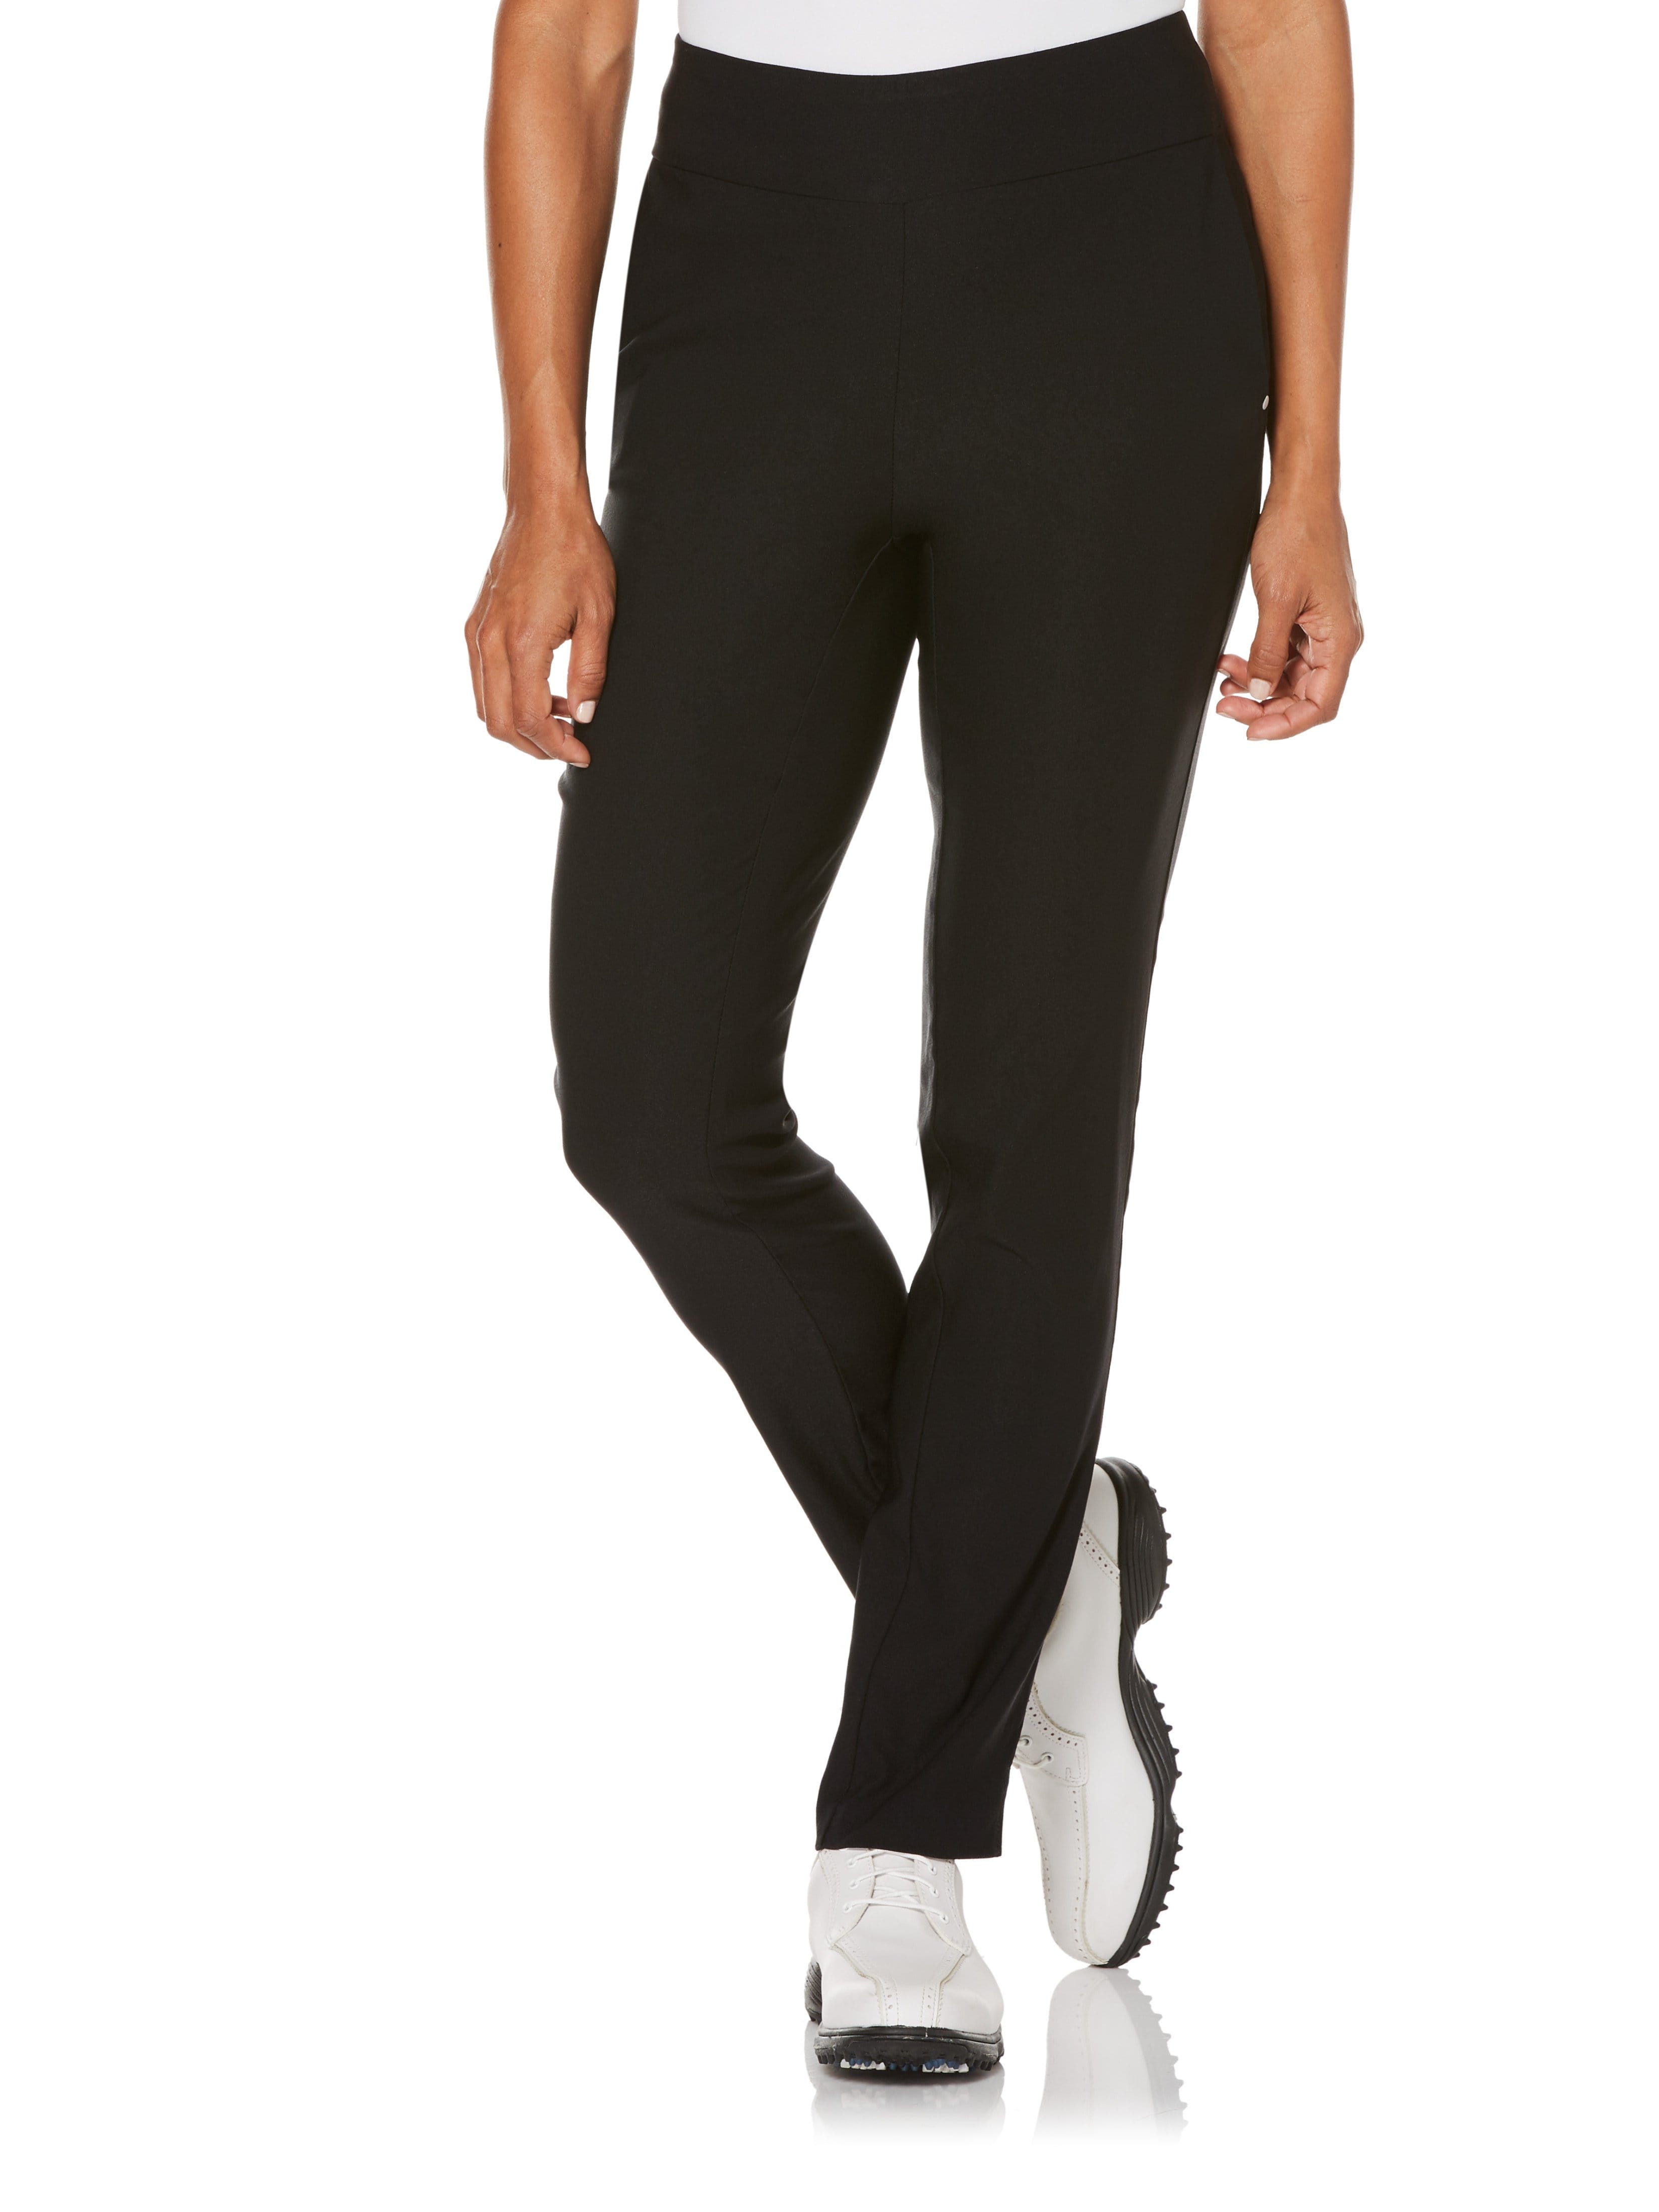 Swing Control Master Core Slim Women's Golf Pants - Black - Fore Ladies -  Golf Dresses and Clothes, Tennis Skirts and Outfits, and Fashionable  Activewear